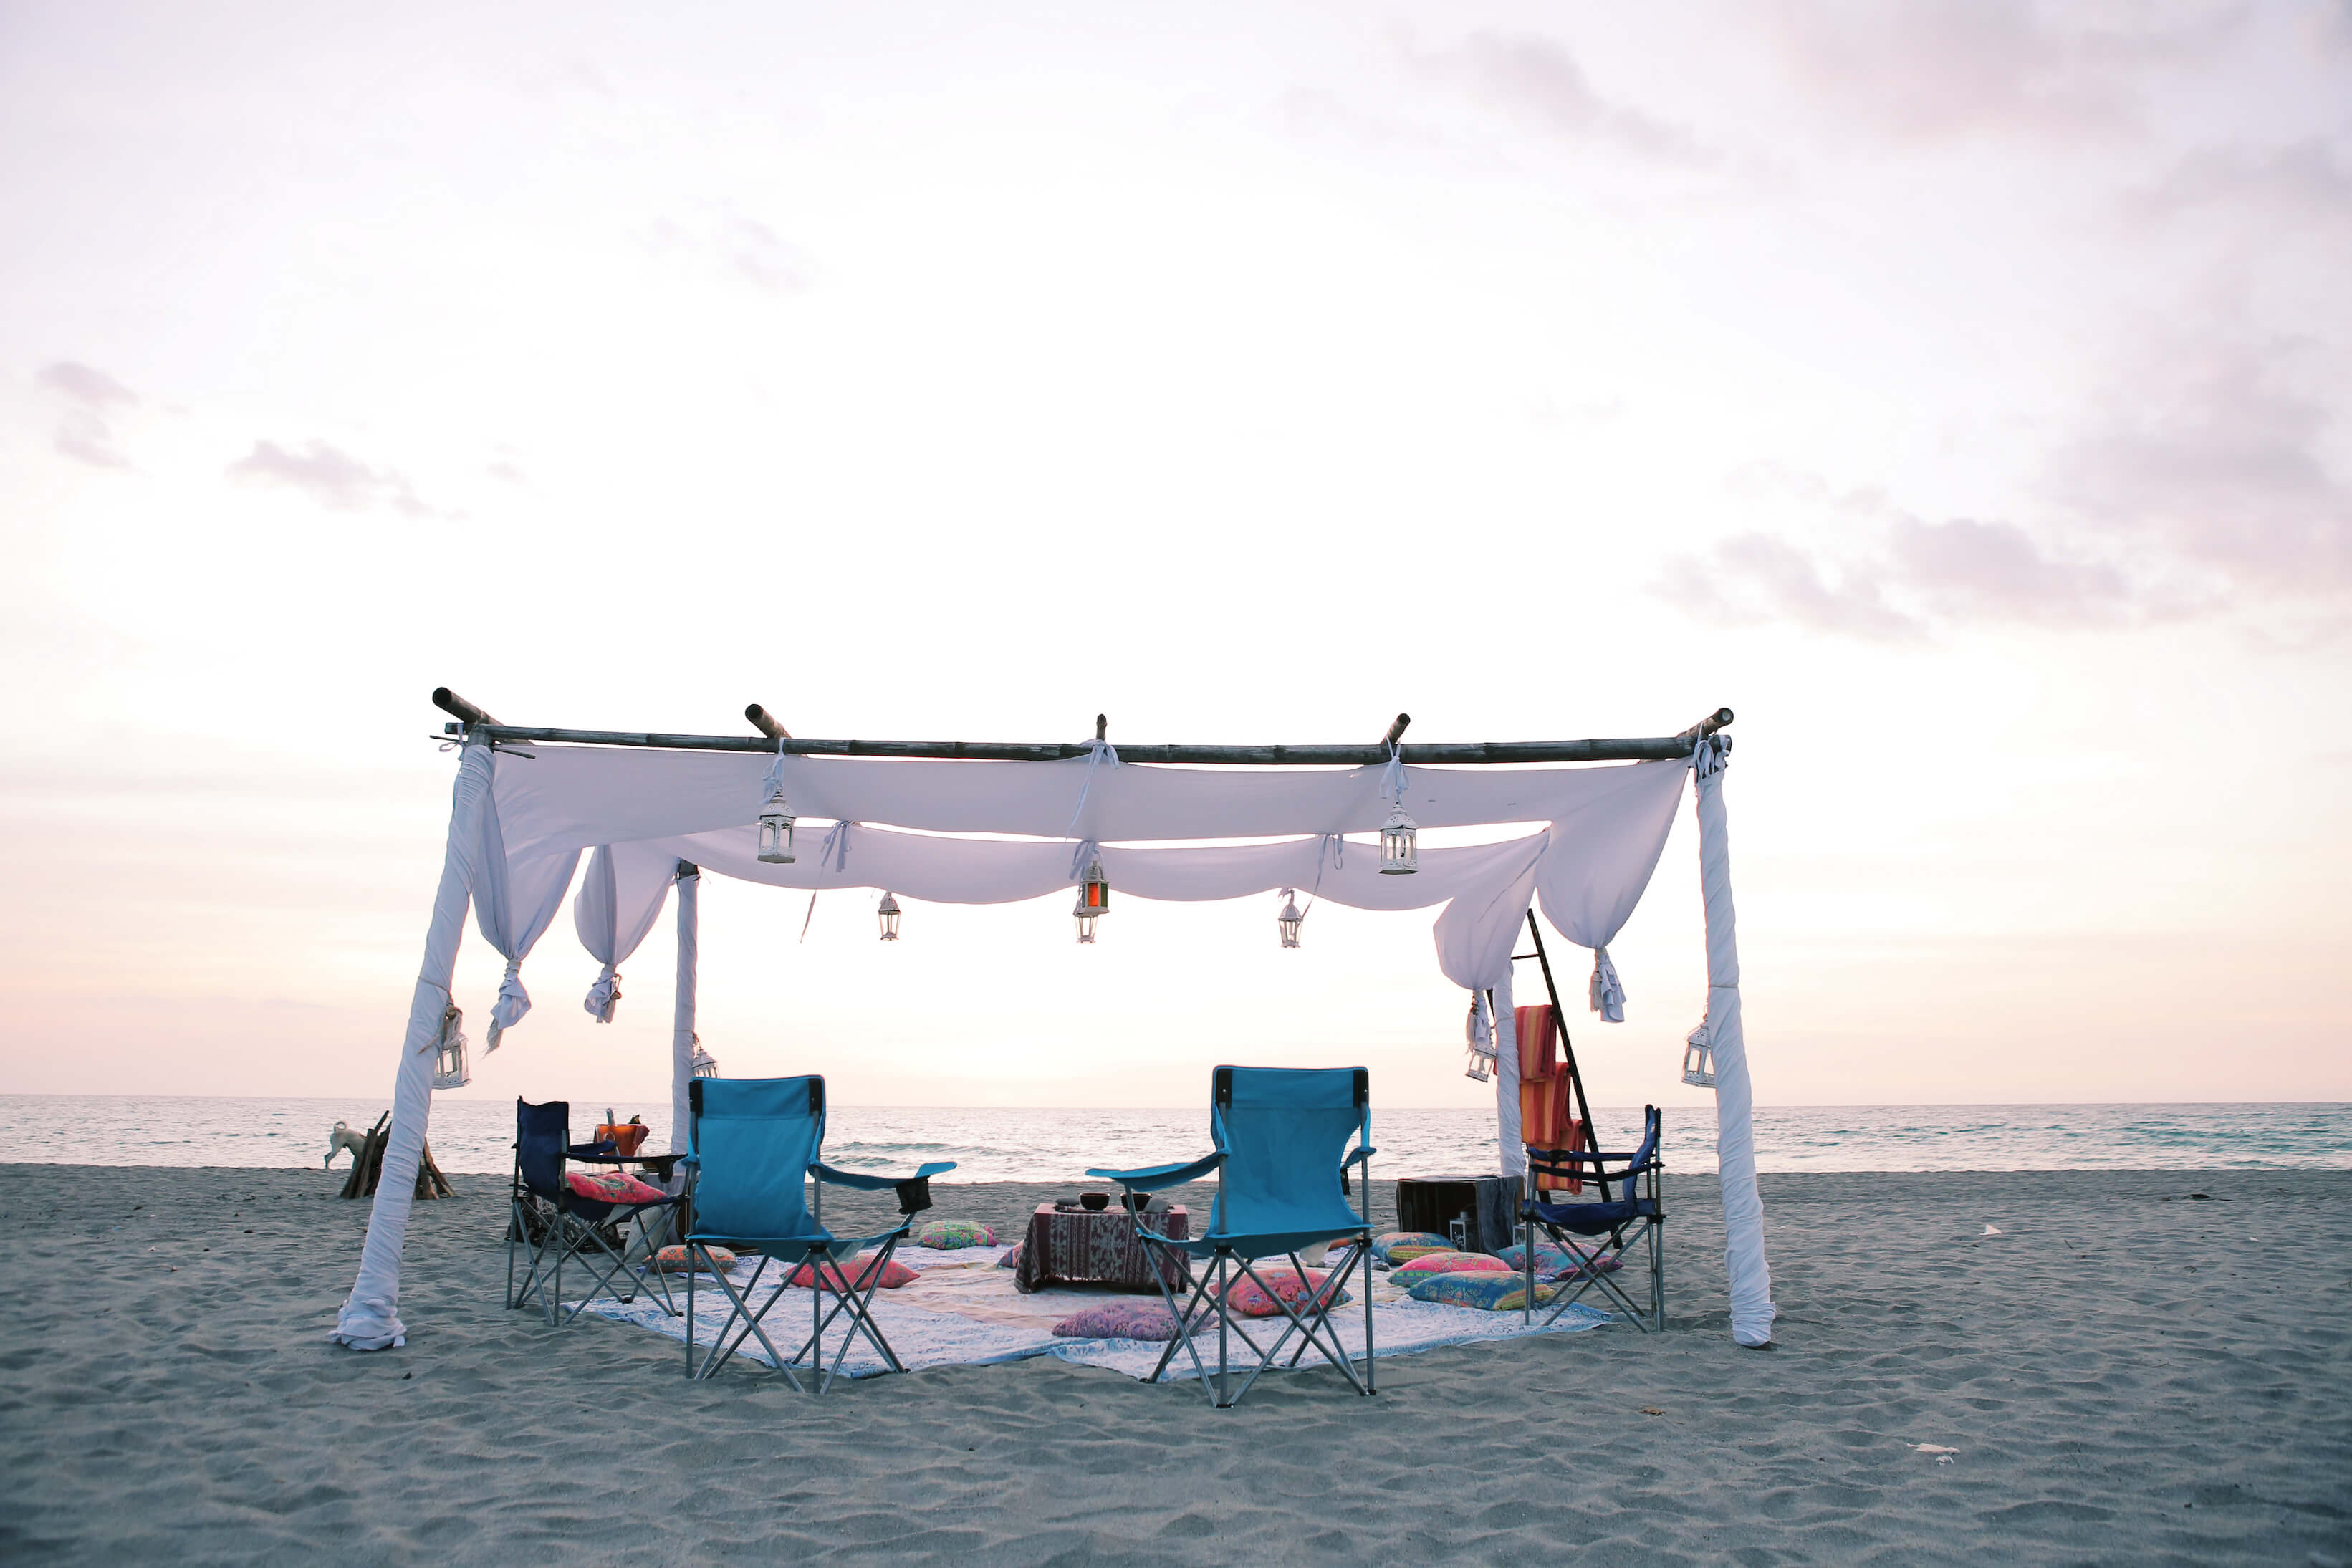 Camping chairs under a tent on the beach.